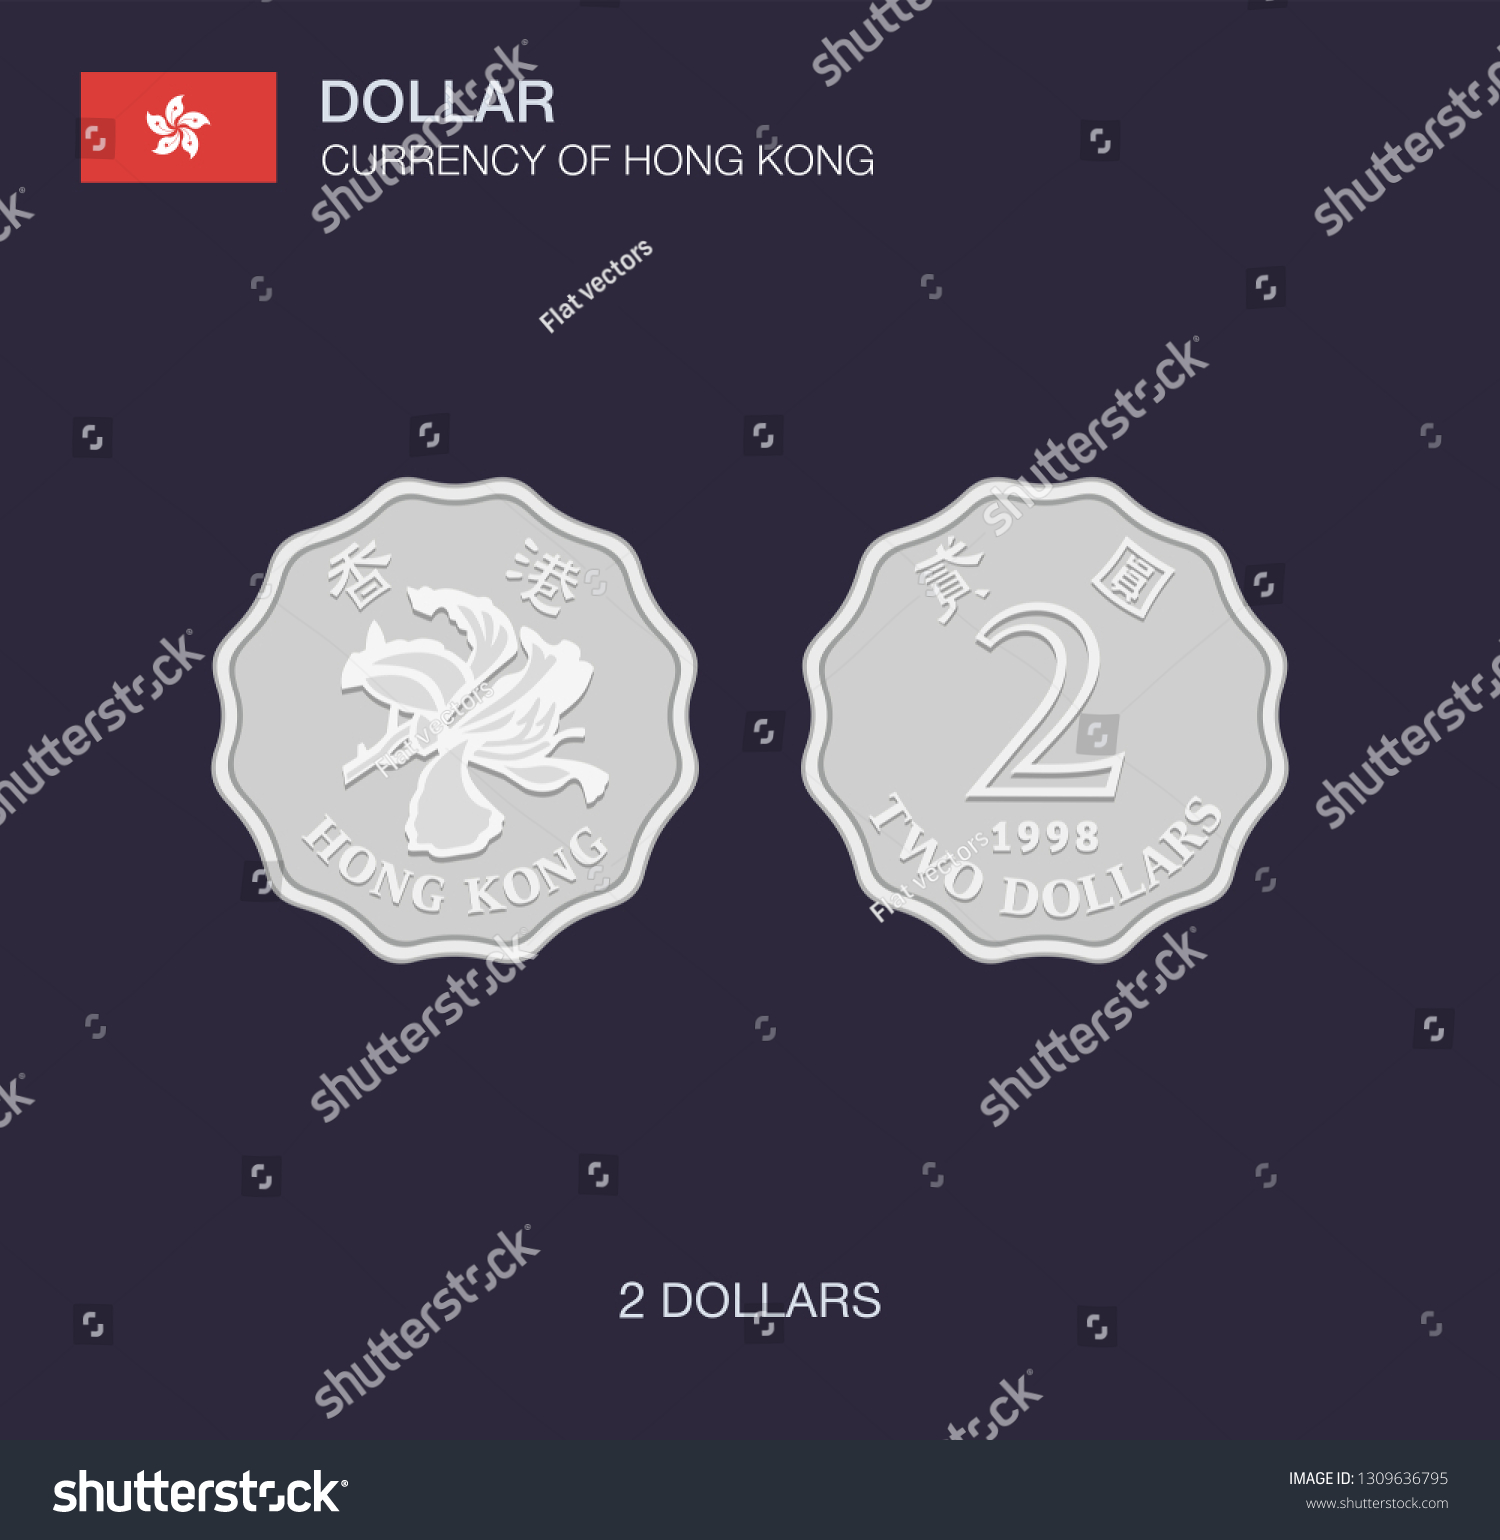 SVG of Currency of Hong Kong. Flat vector illustration of two dollars. svg